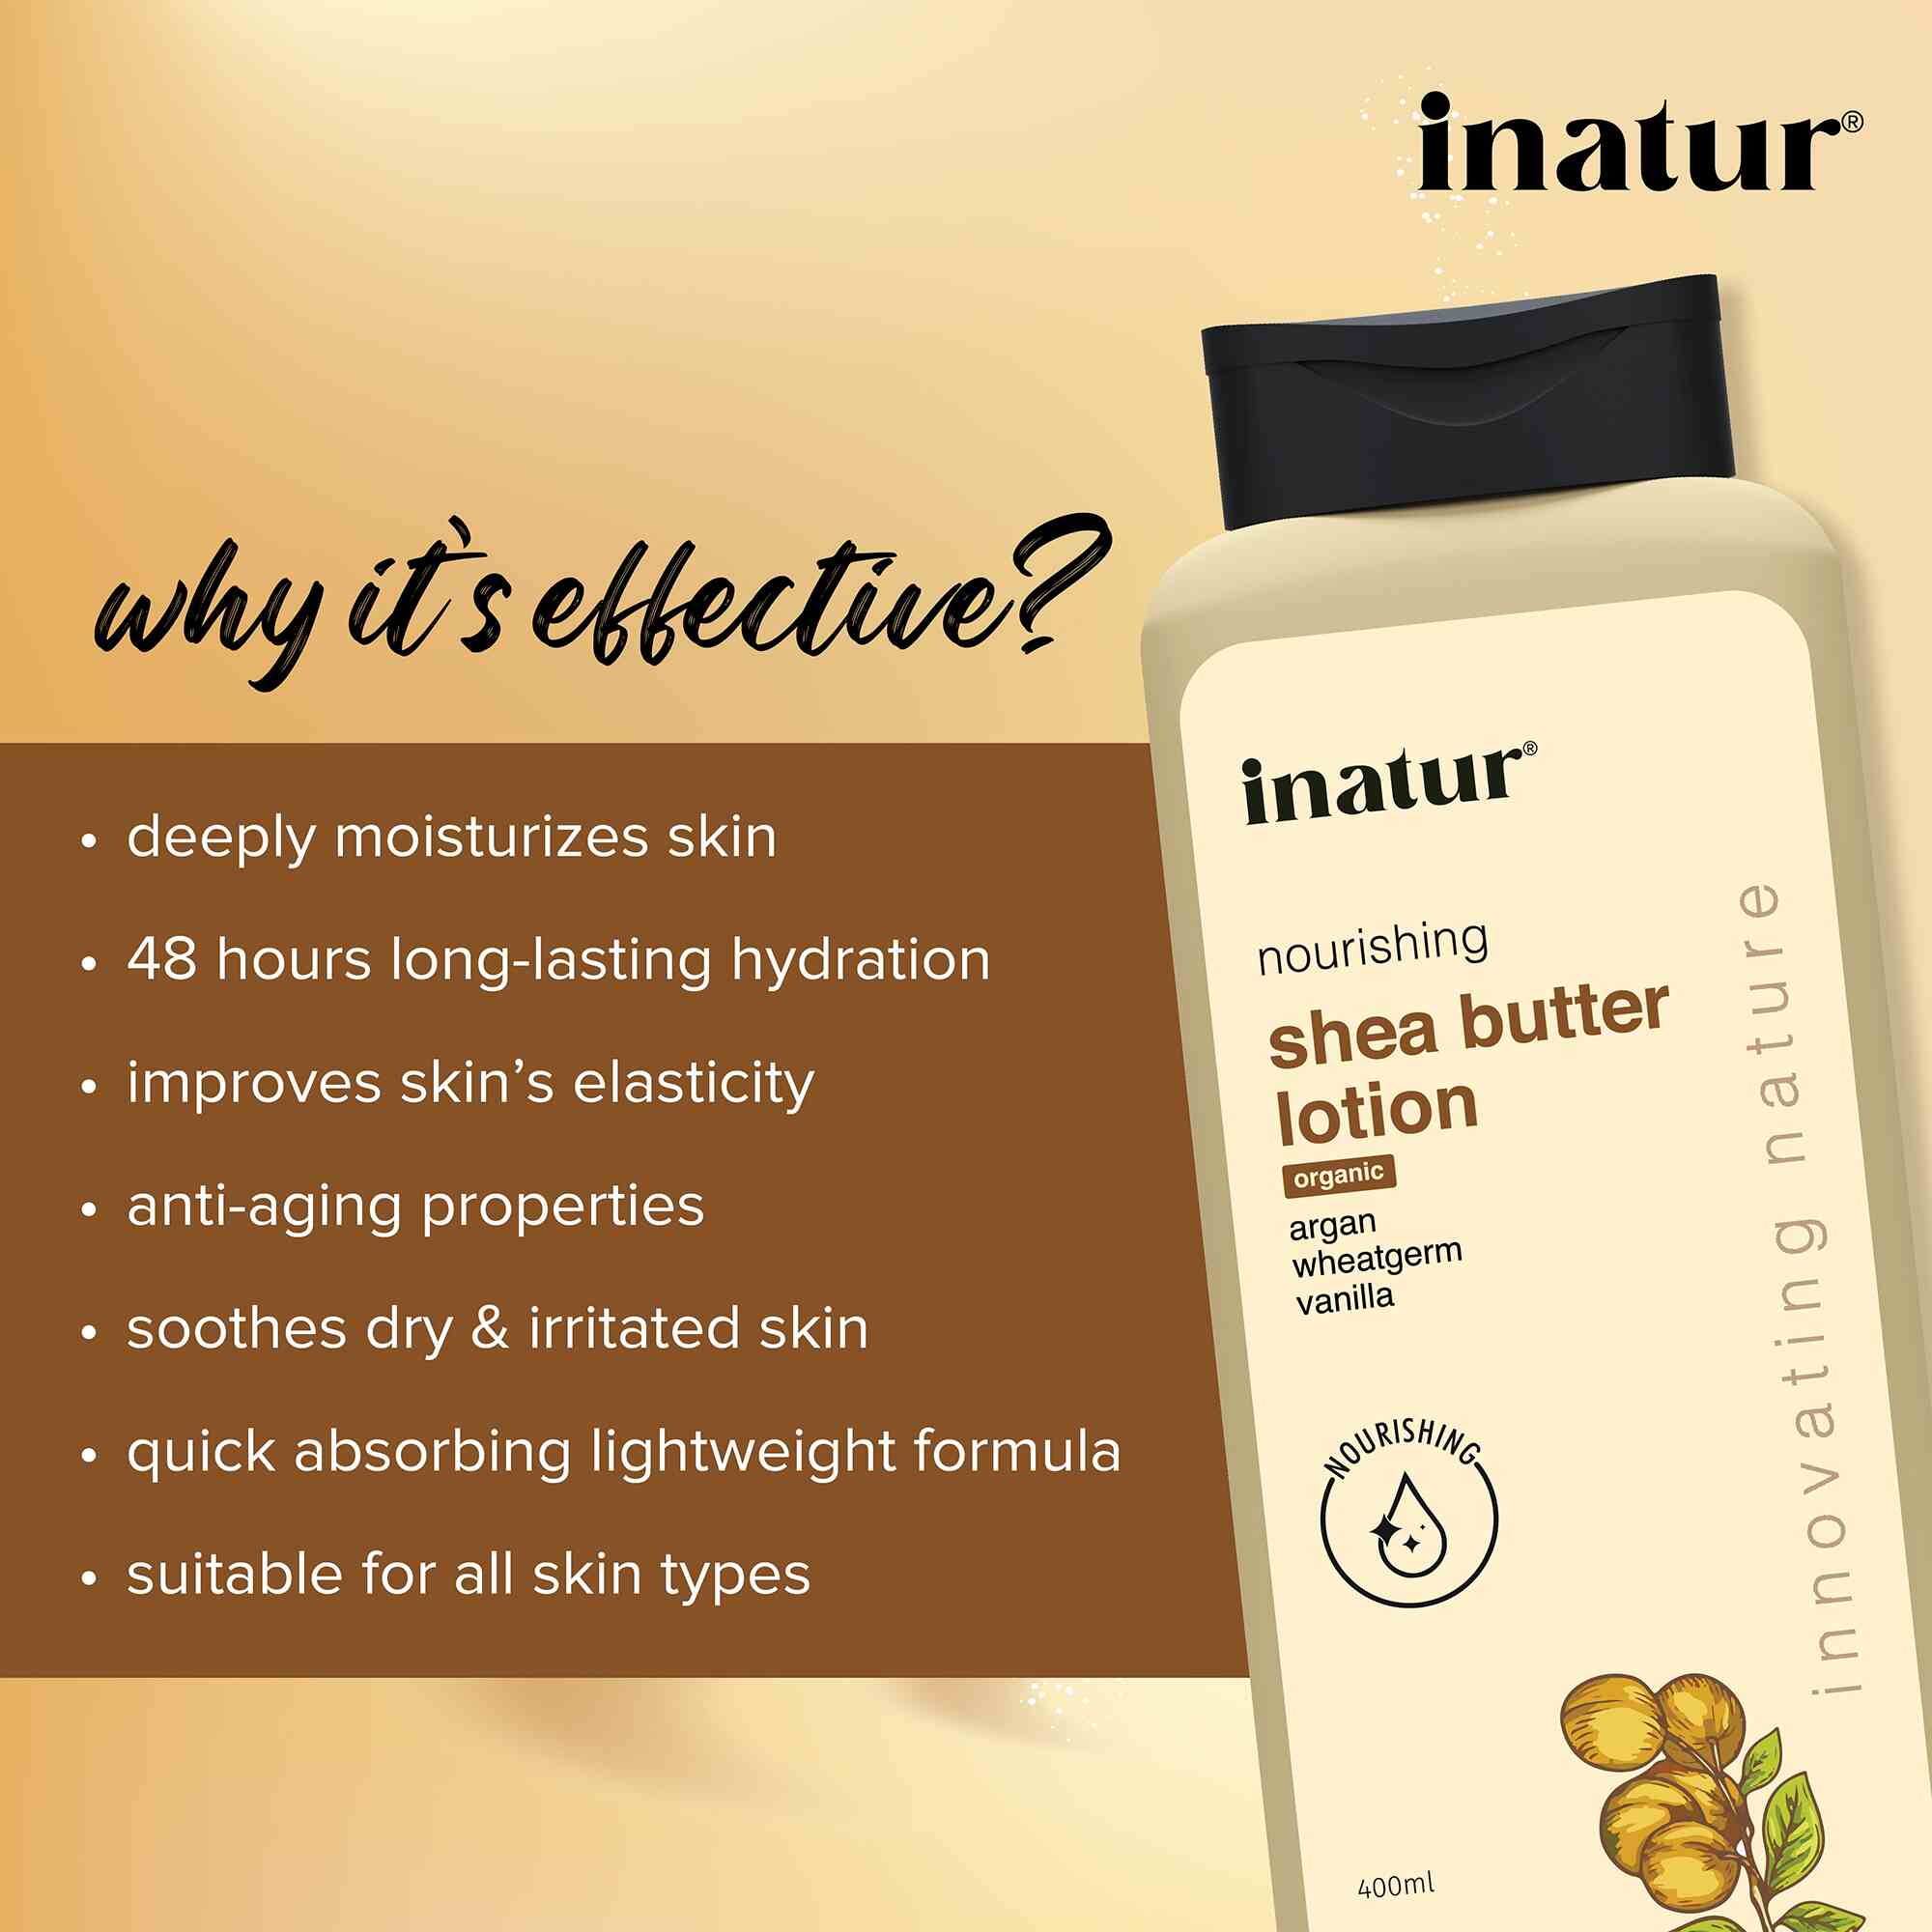 why inatur sheabutter lotion is effective